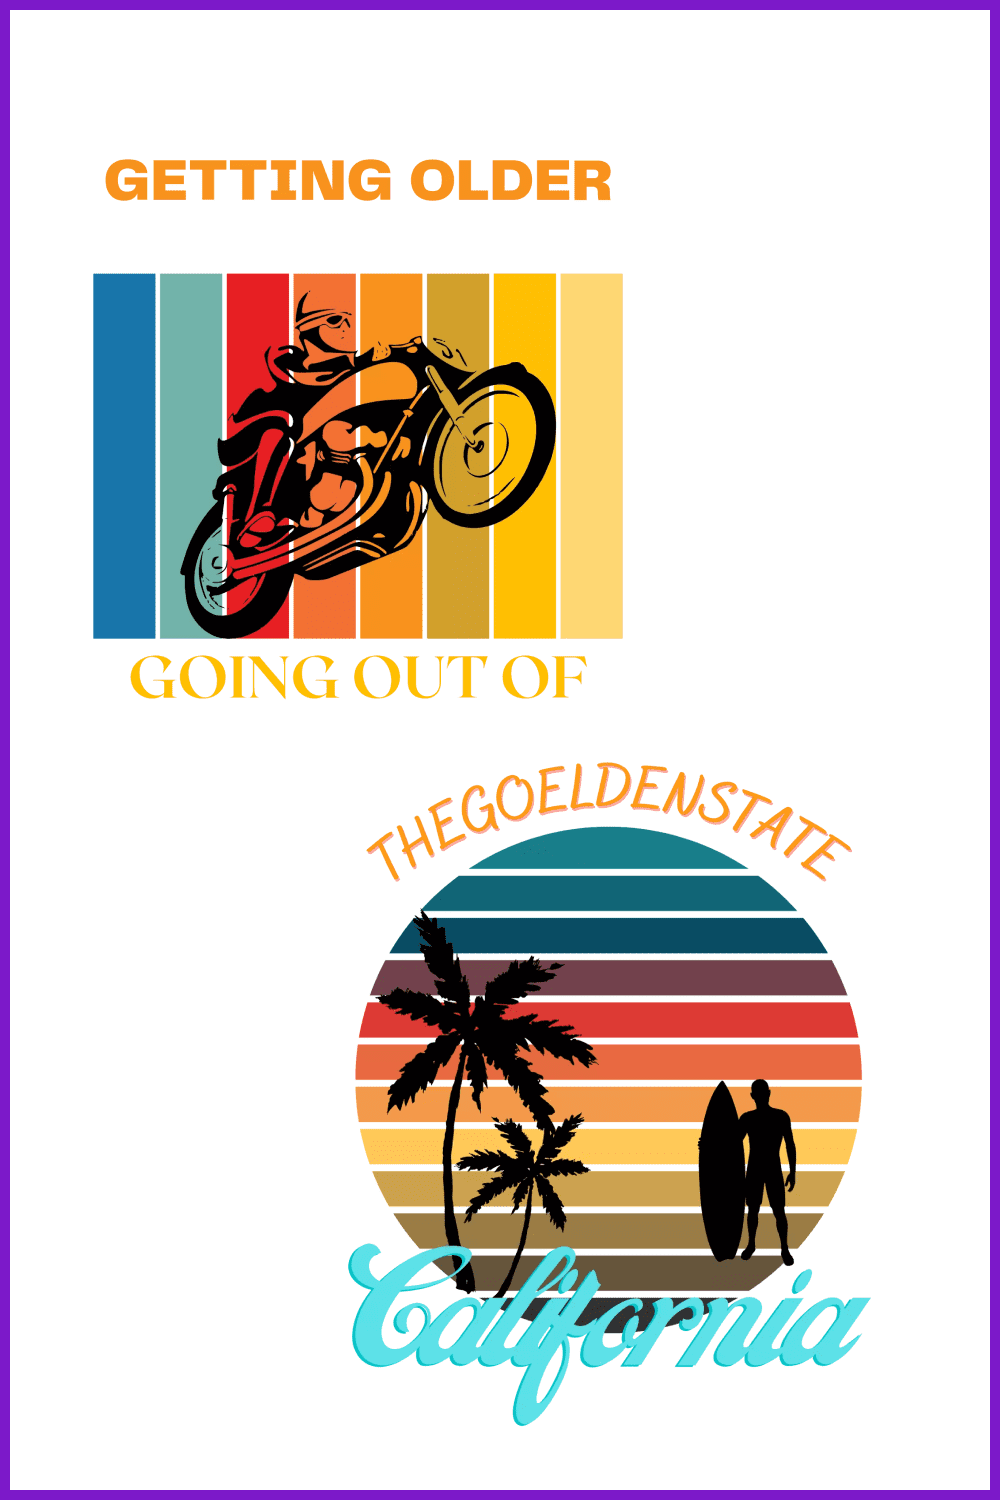 Surfer and motorcyclist on rainbow background in vintage style.